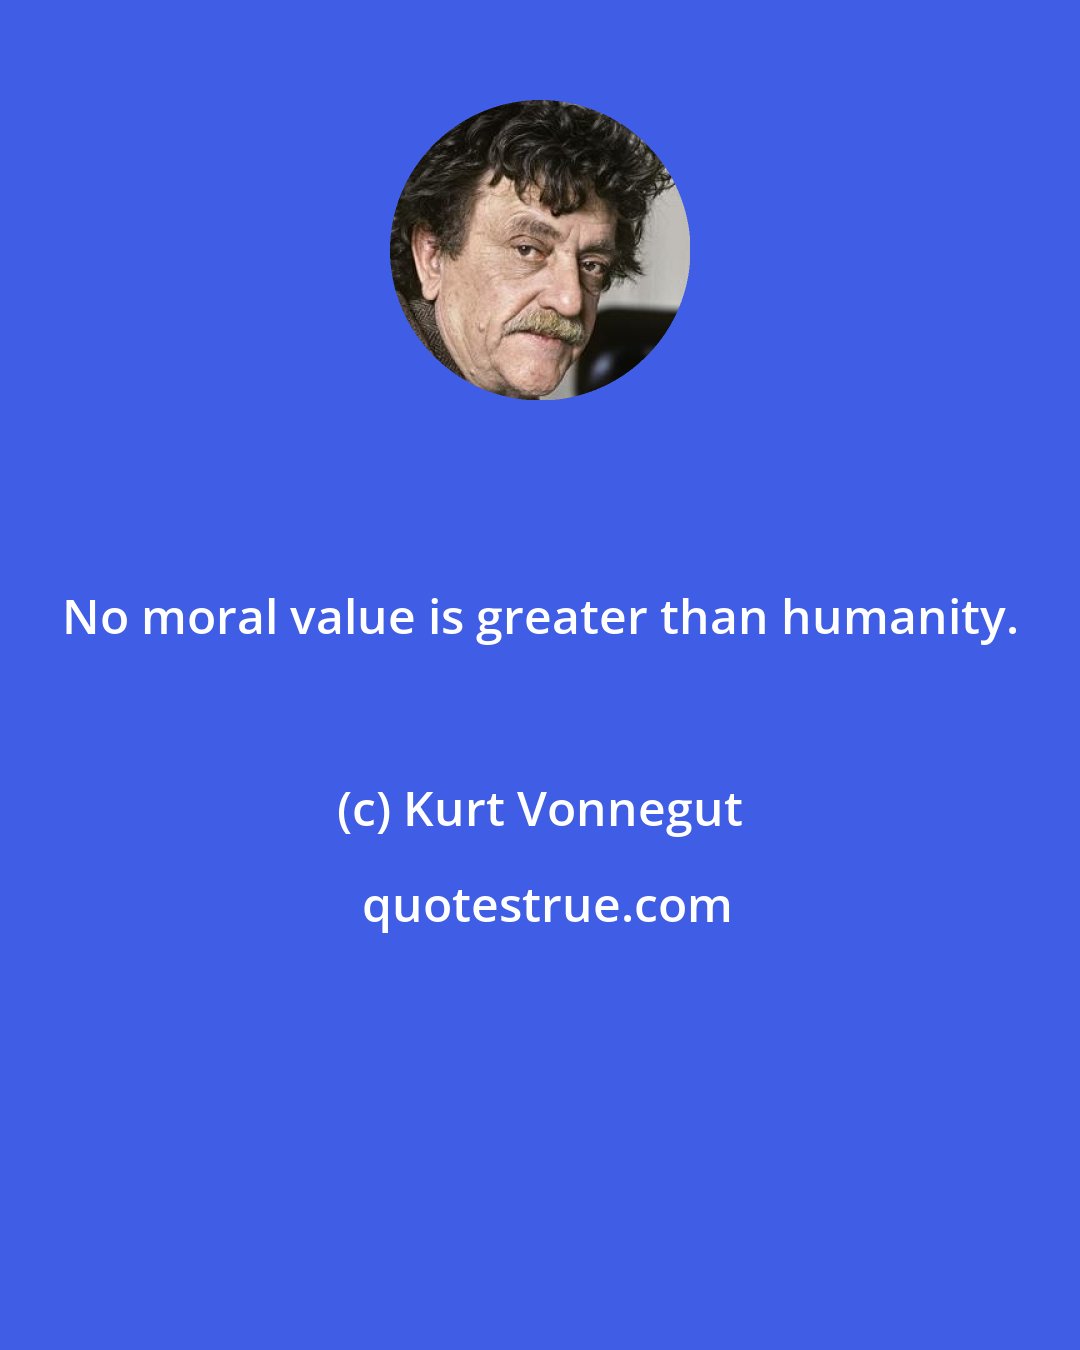 Kurt Vonnegut: No moral value is greater than humanity.